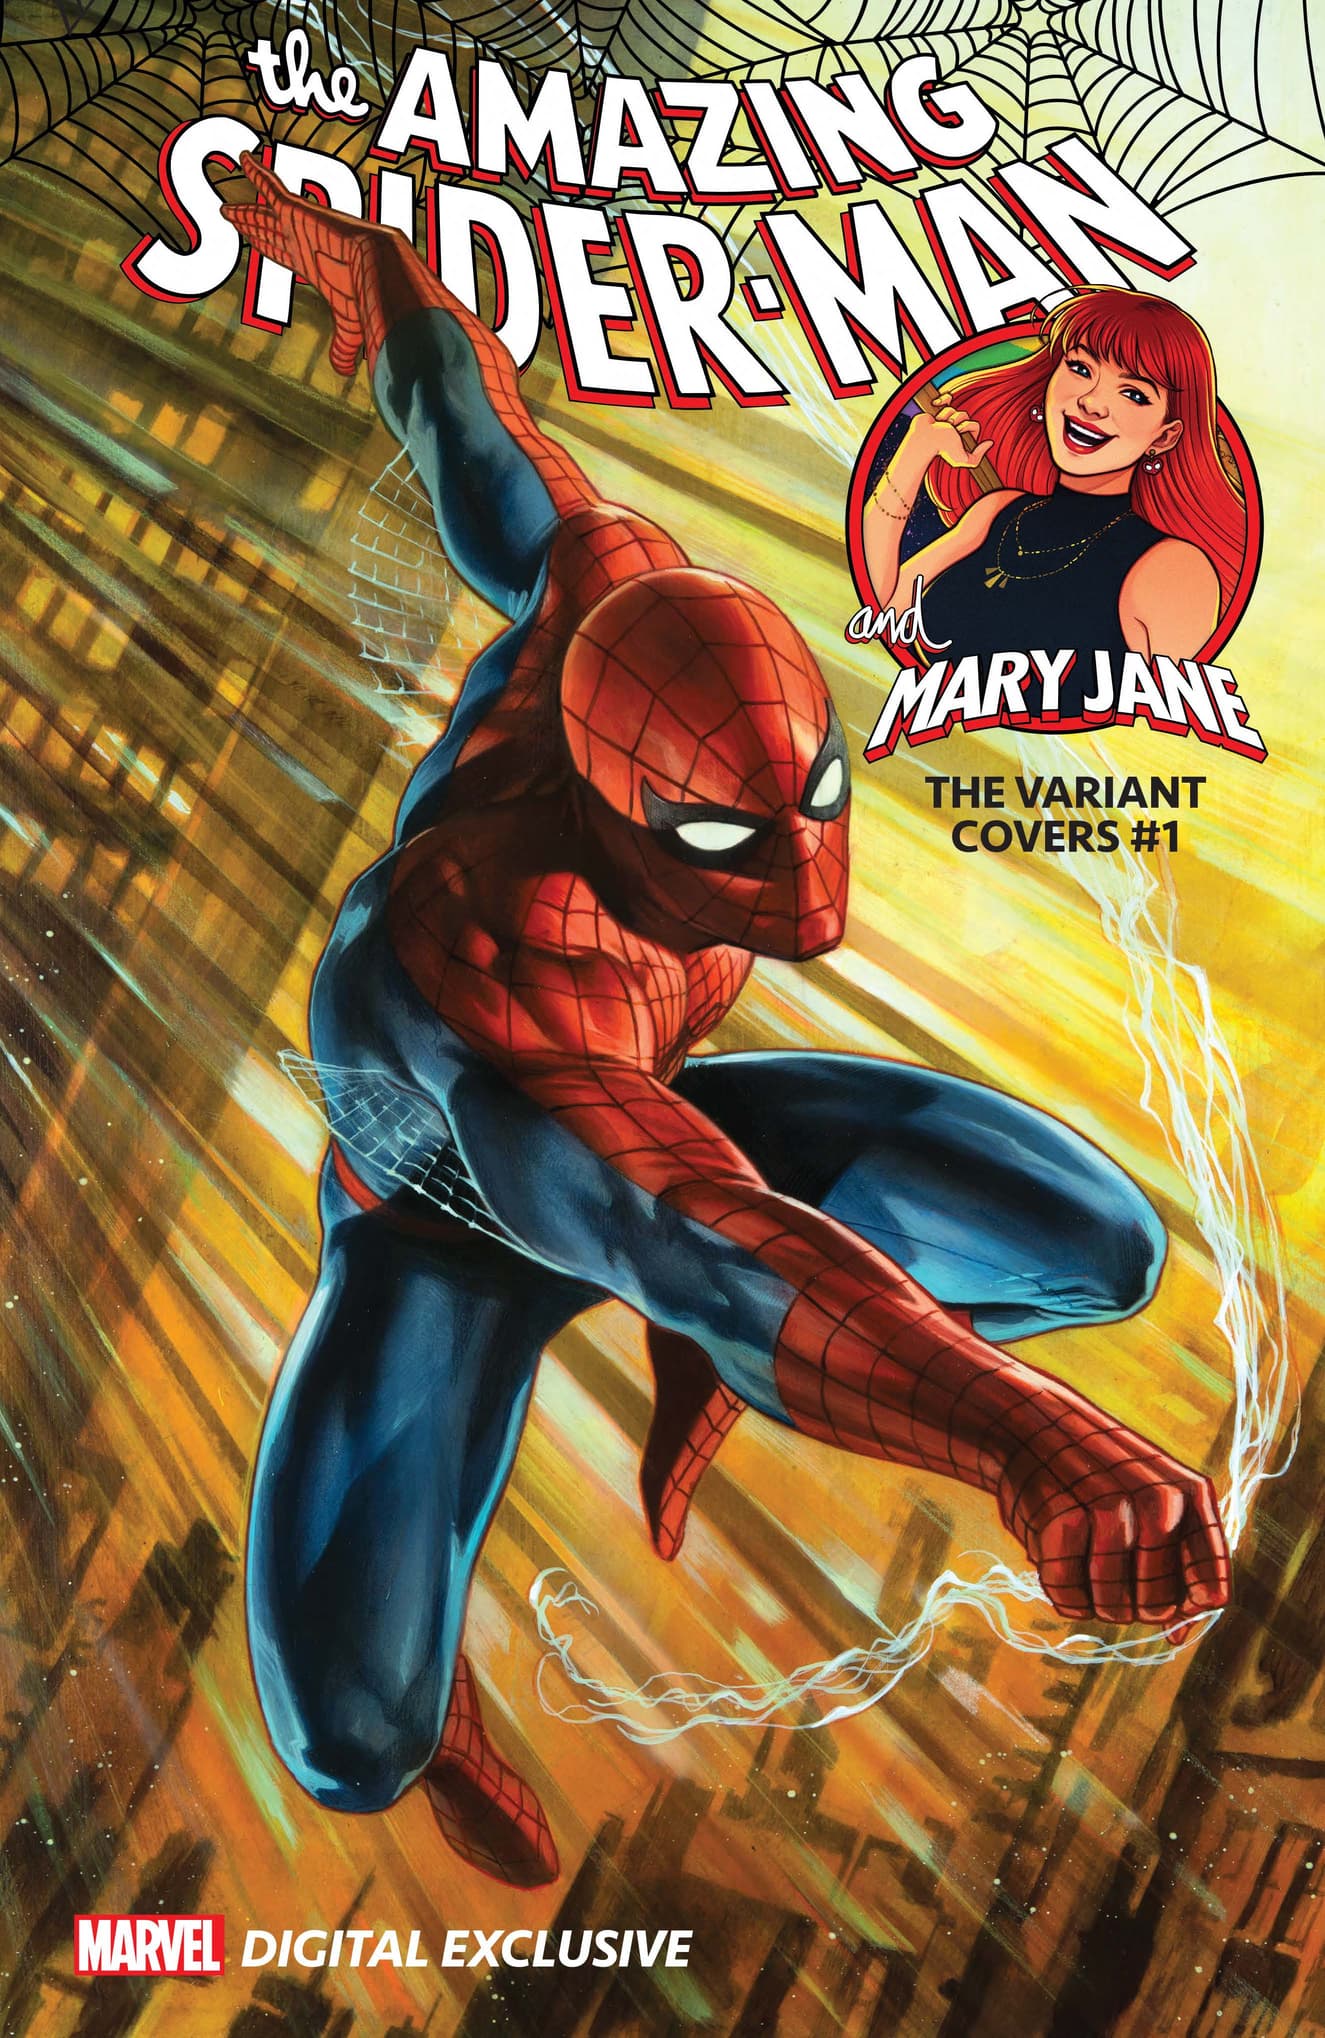 AMAZING SPIDER-MAN & MARY JANE: THE VARIANT COVERS #1 